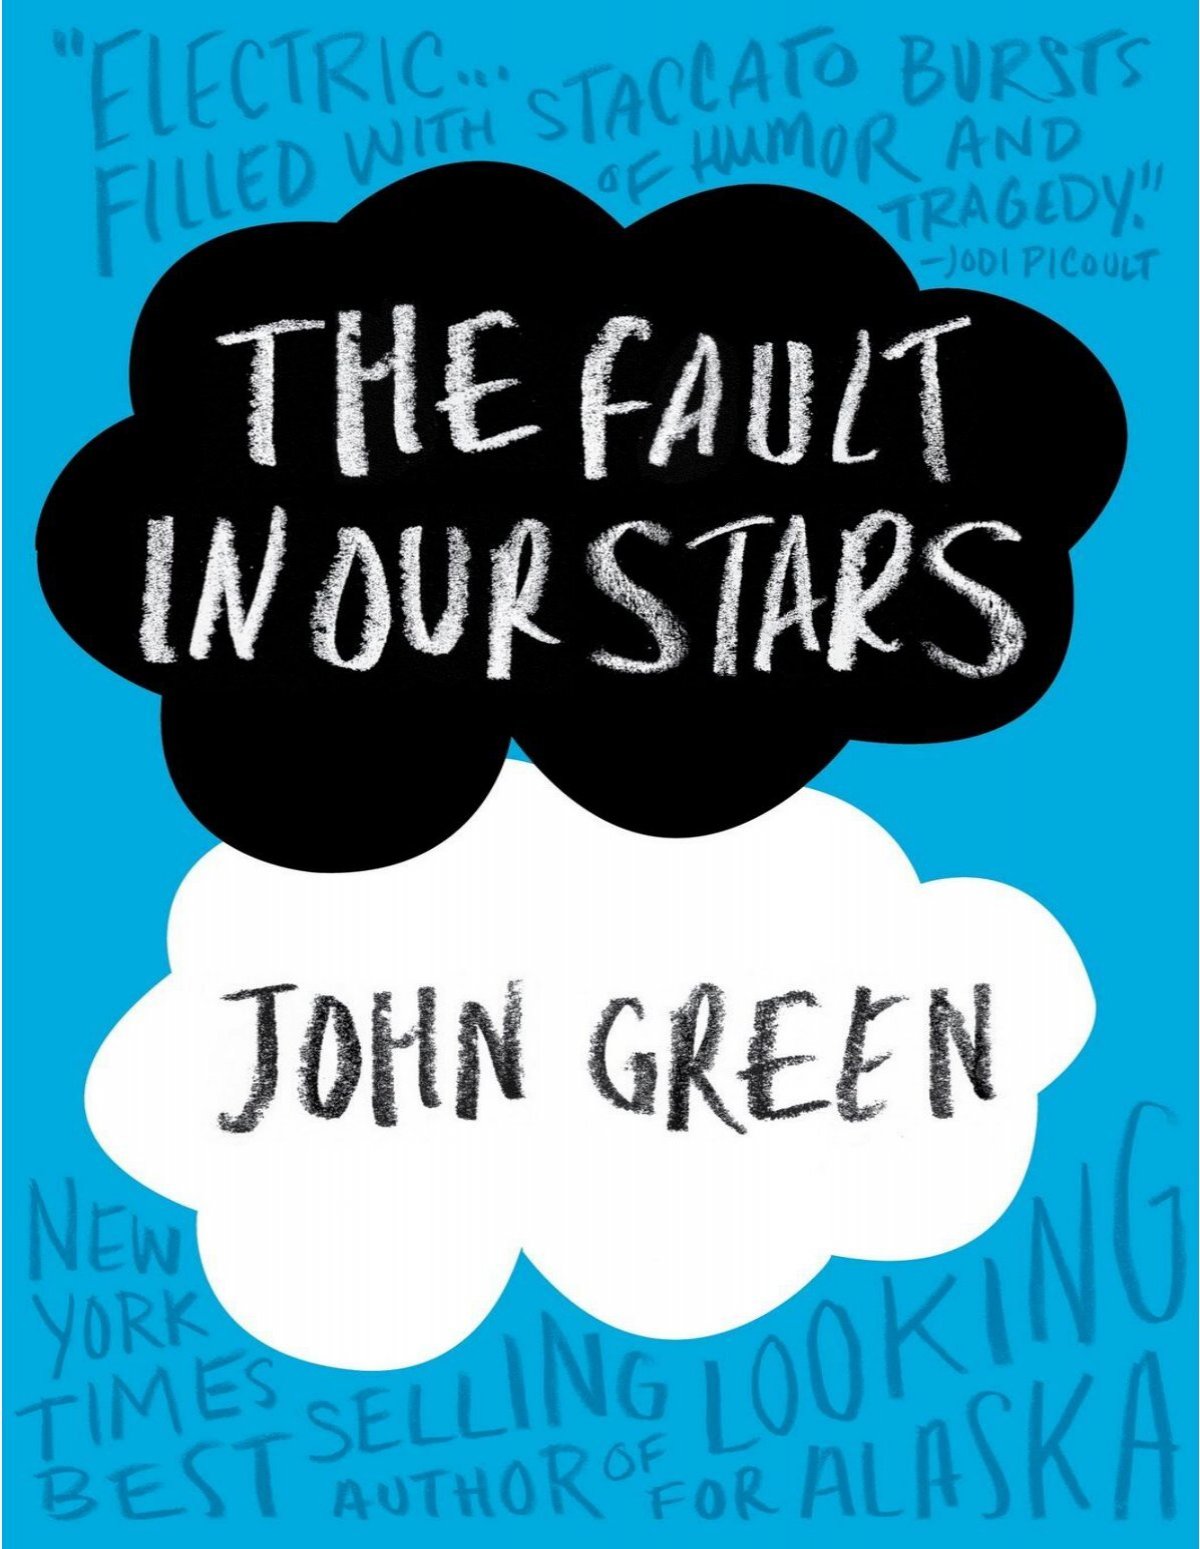 John Green Quote: “Idiotically, it occurred to me that my pink underwear  didn't match my